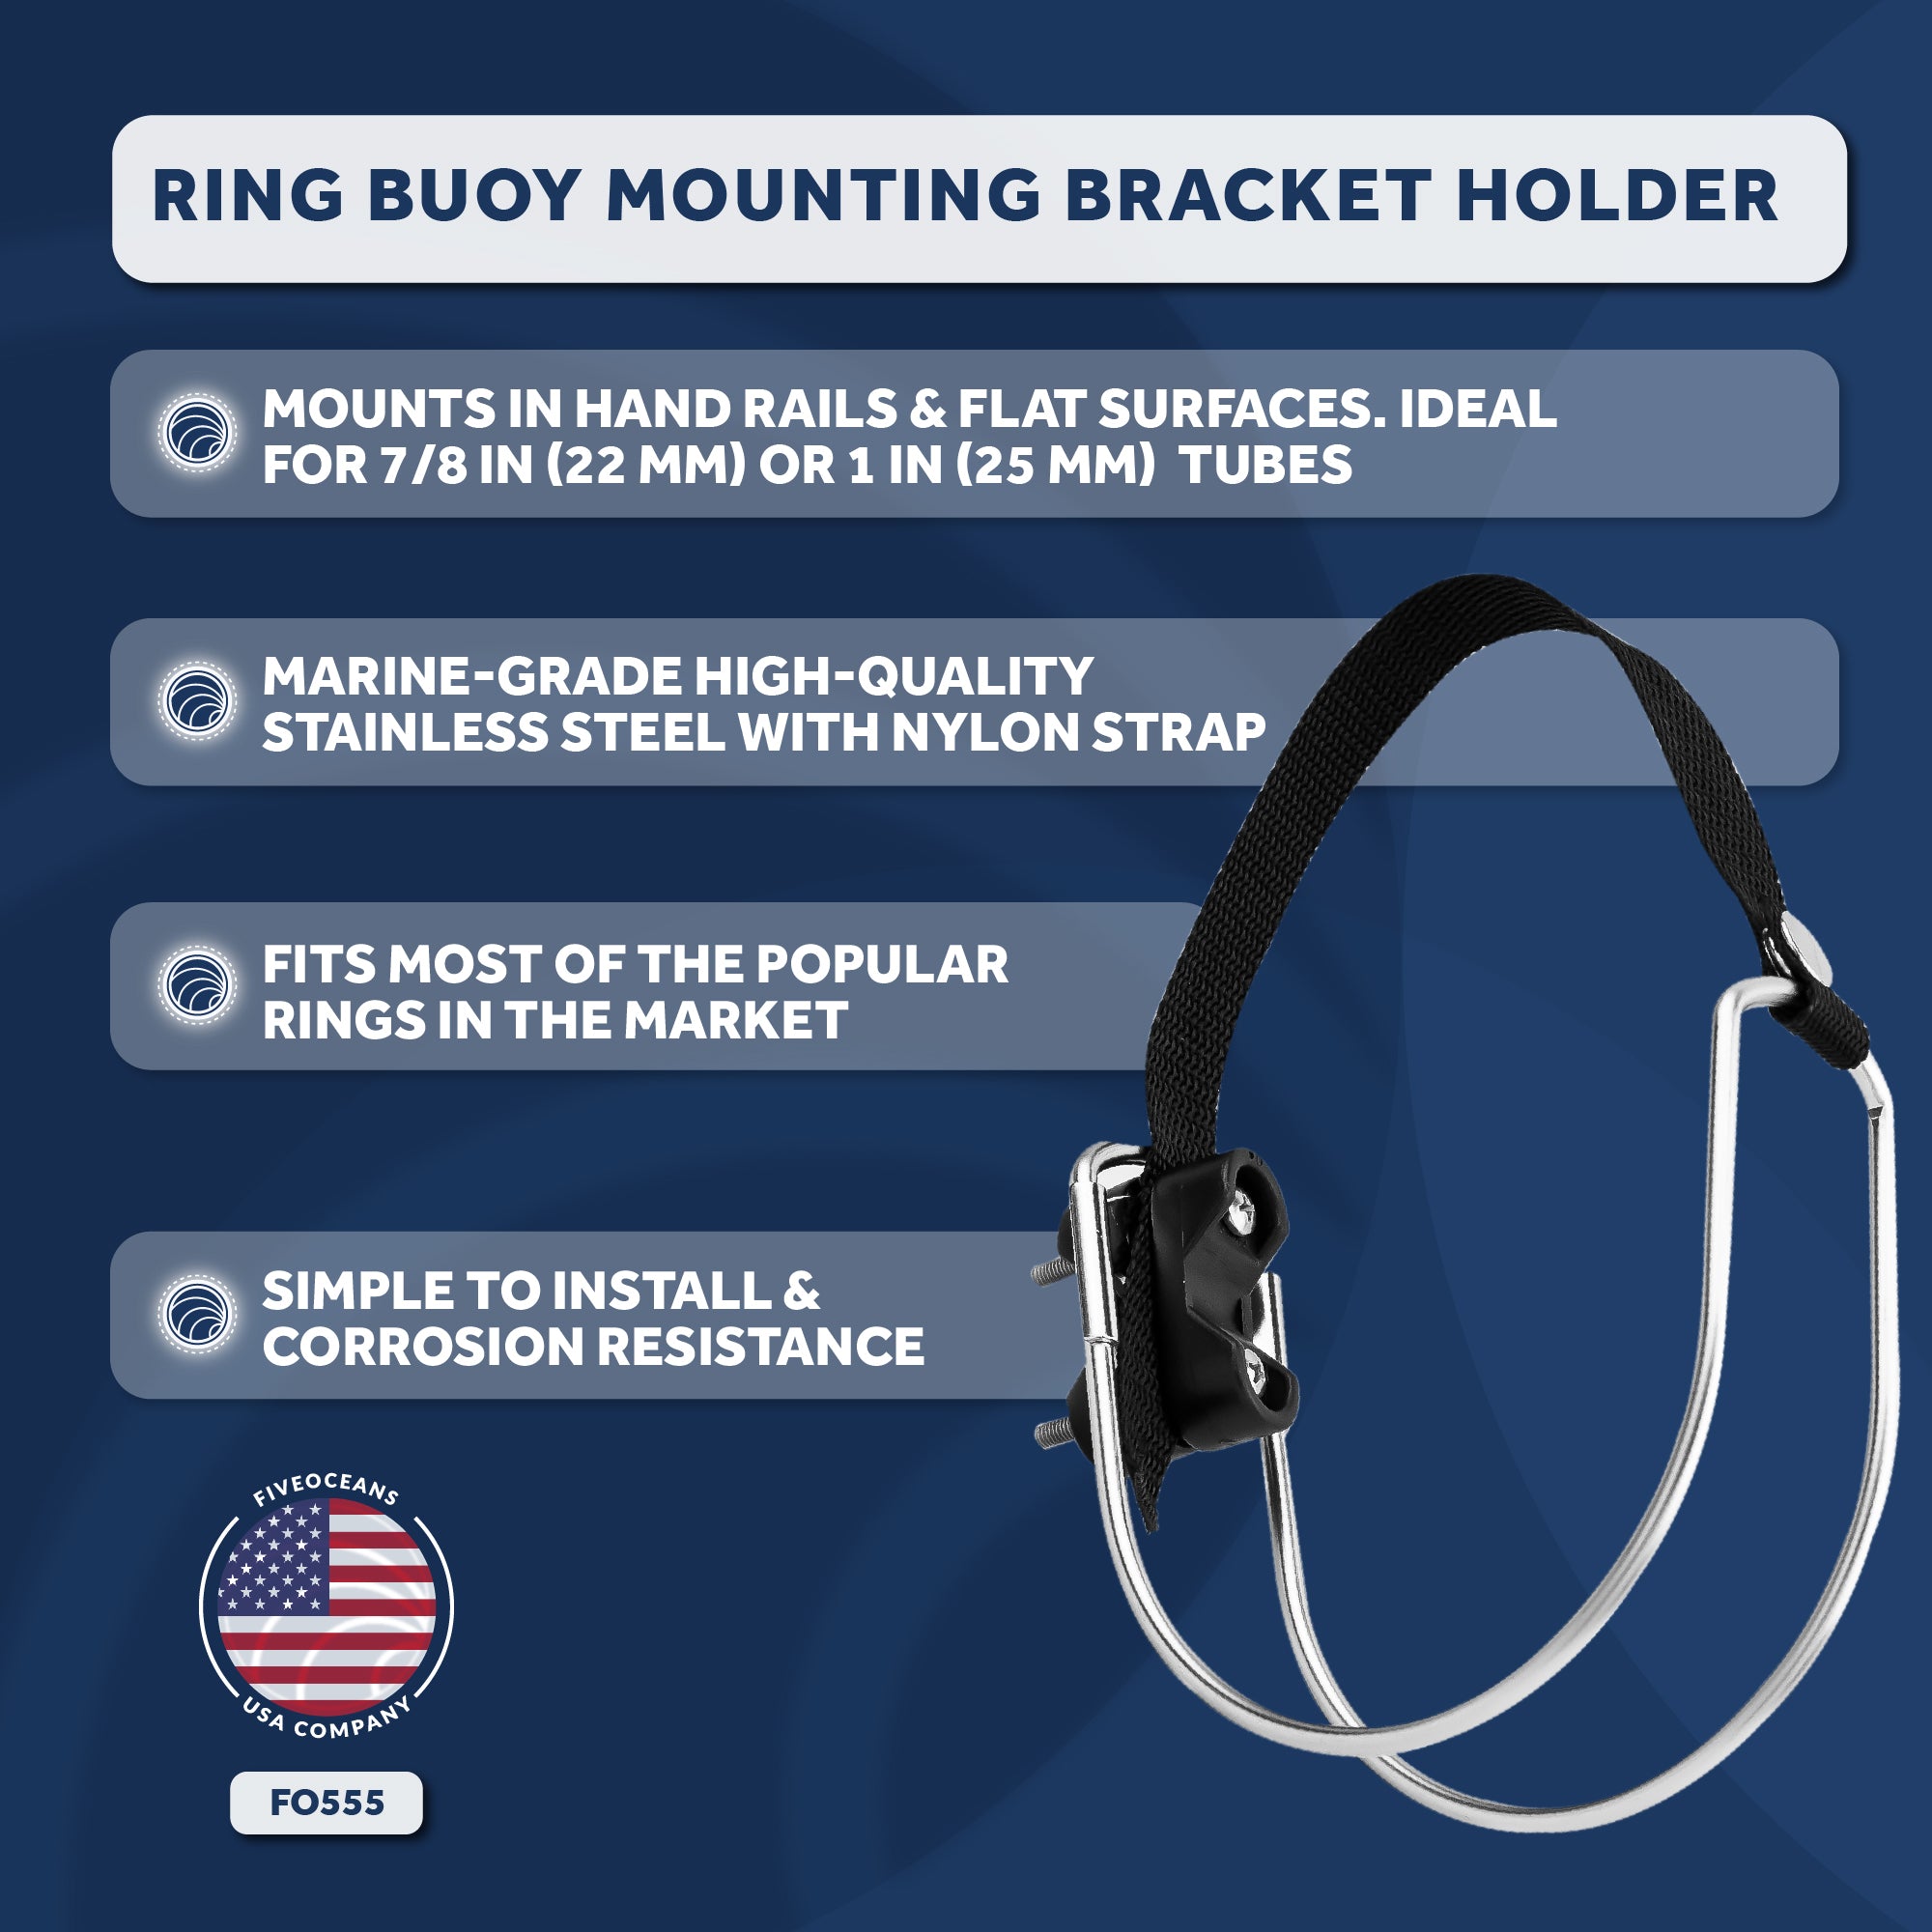 Ring Buoy Mounting Bracket Holder with Strap, Stainless Steel, Rail/Flat Mount - FO555